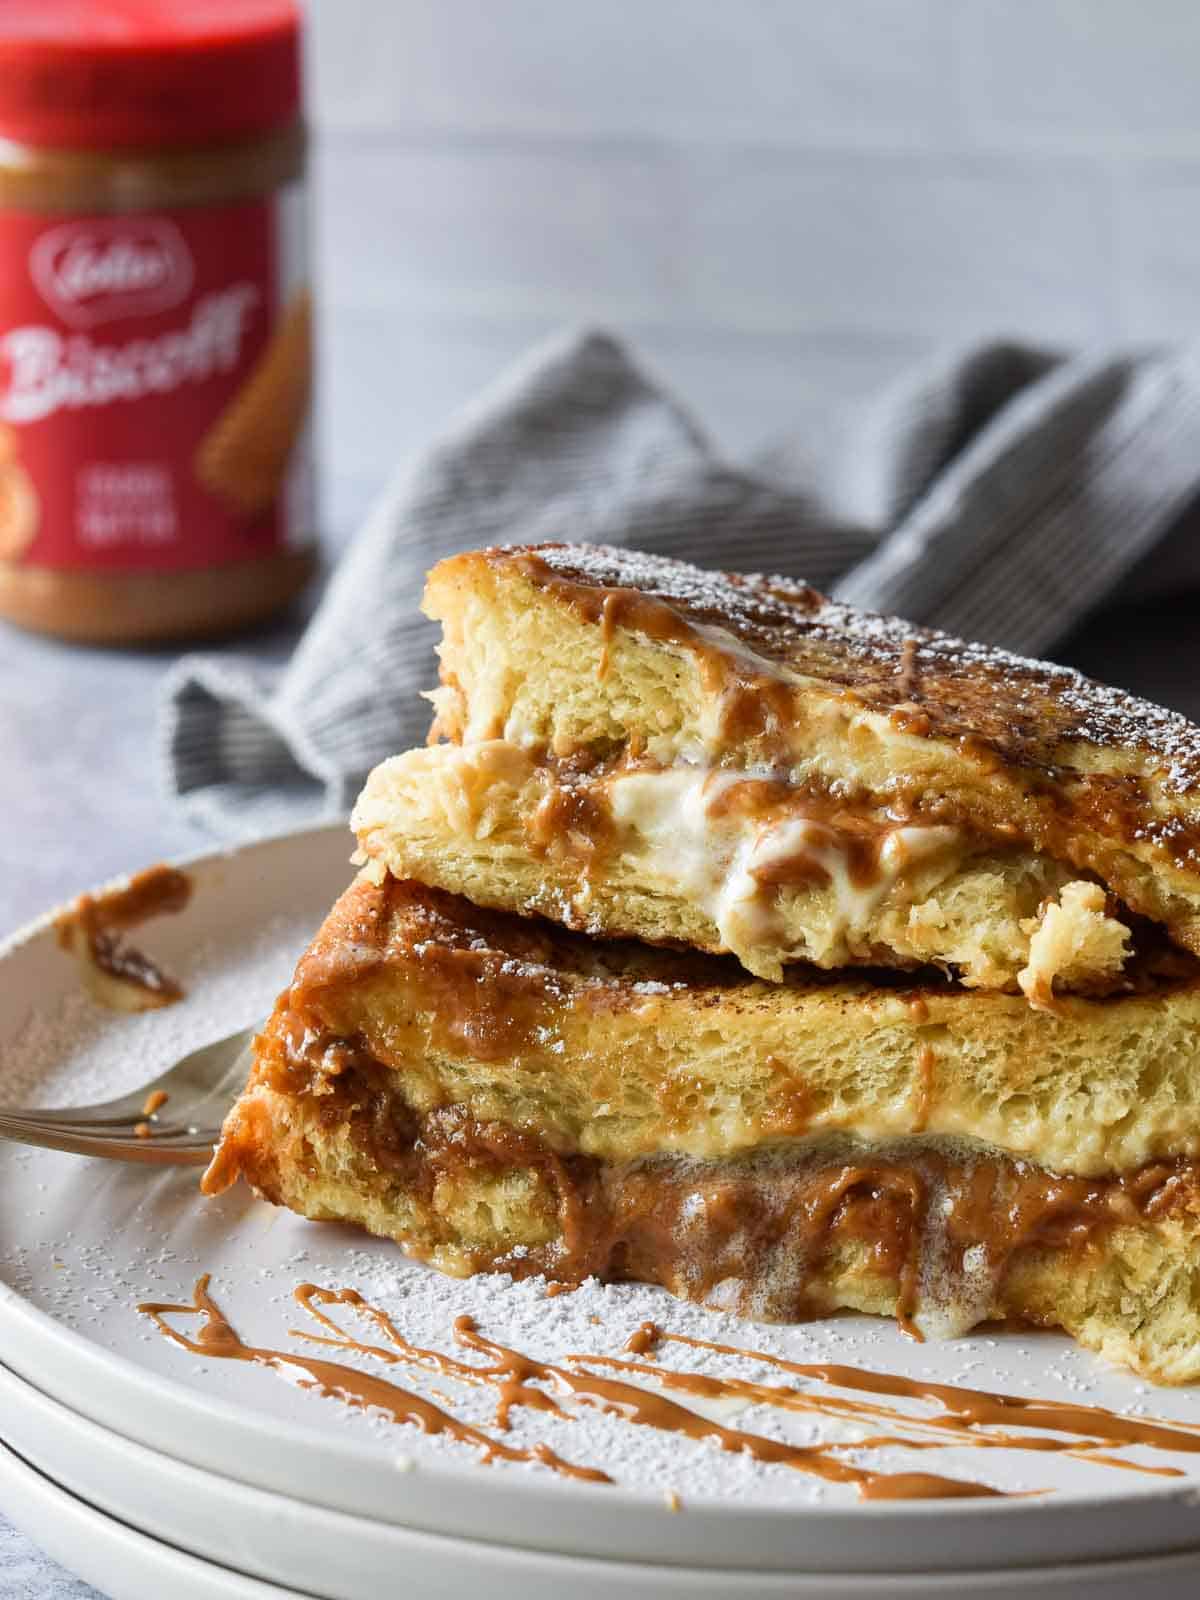 Biscoff stuffed French toast cut open on a white plate.